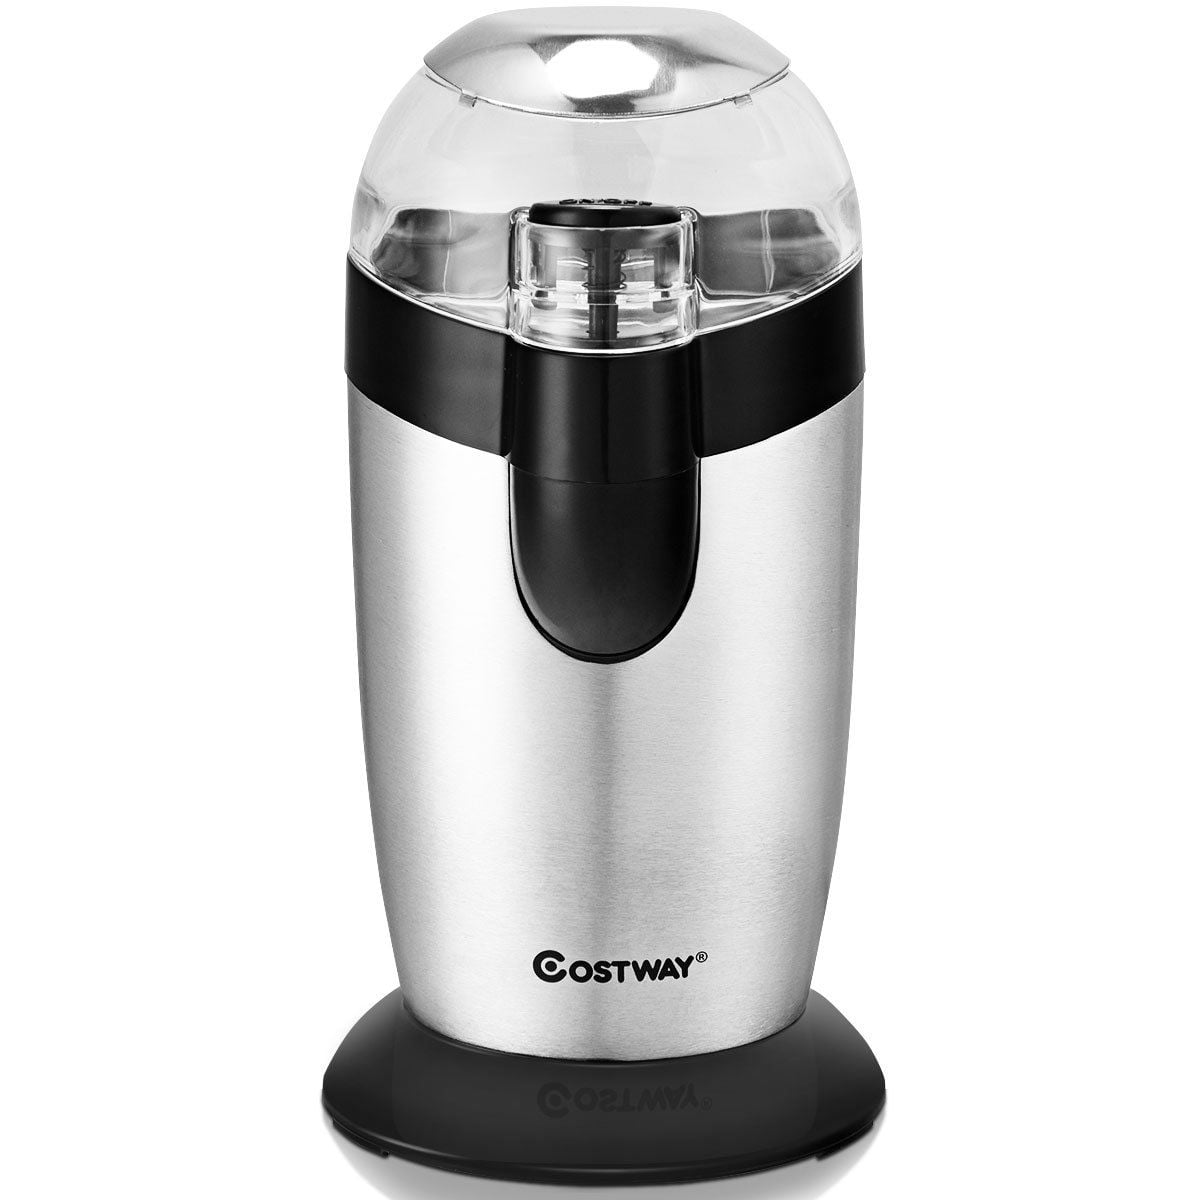 Medium and Fine 70g Capacity Black Powerful 150W COSTWAY Upgraded Electric Coffee Grinder for Beans Spices and Nuts One-Touch Operation with 2 Cutting Stainless Steel Blades for Coarse 